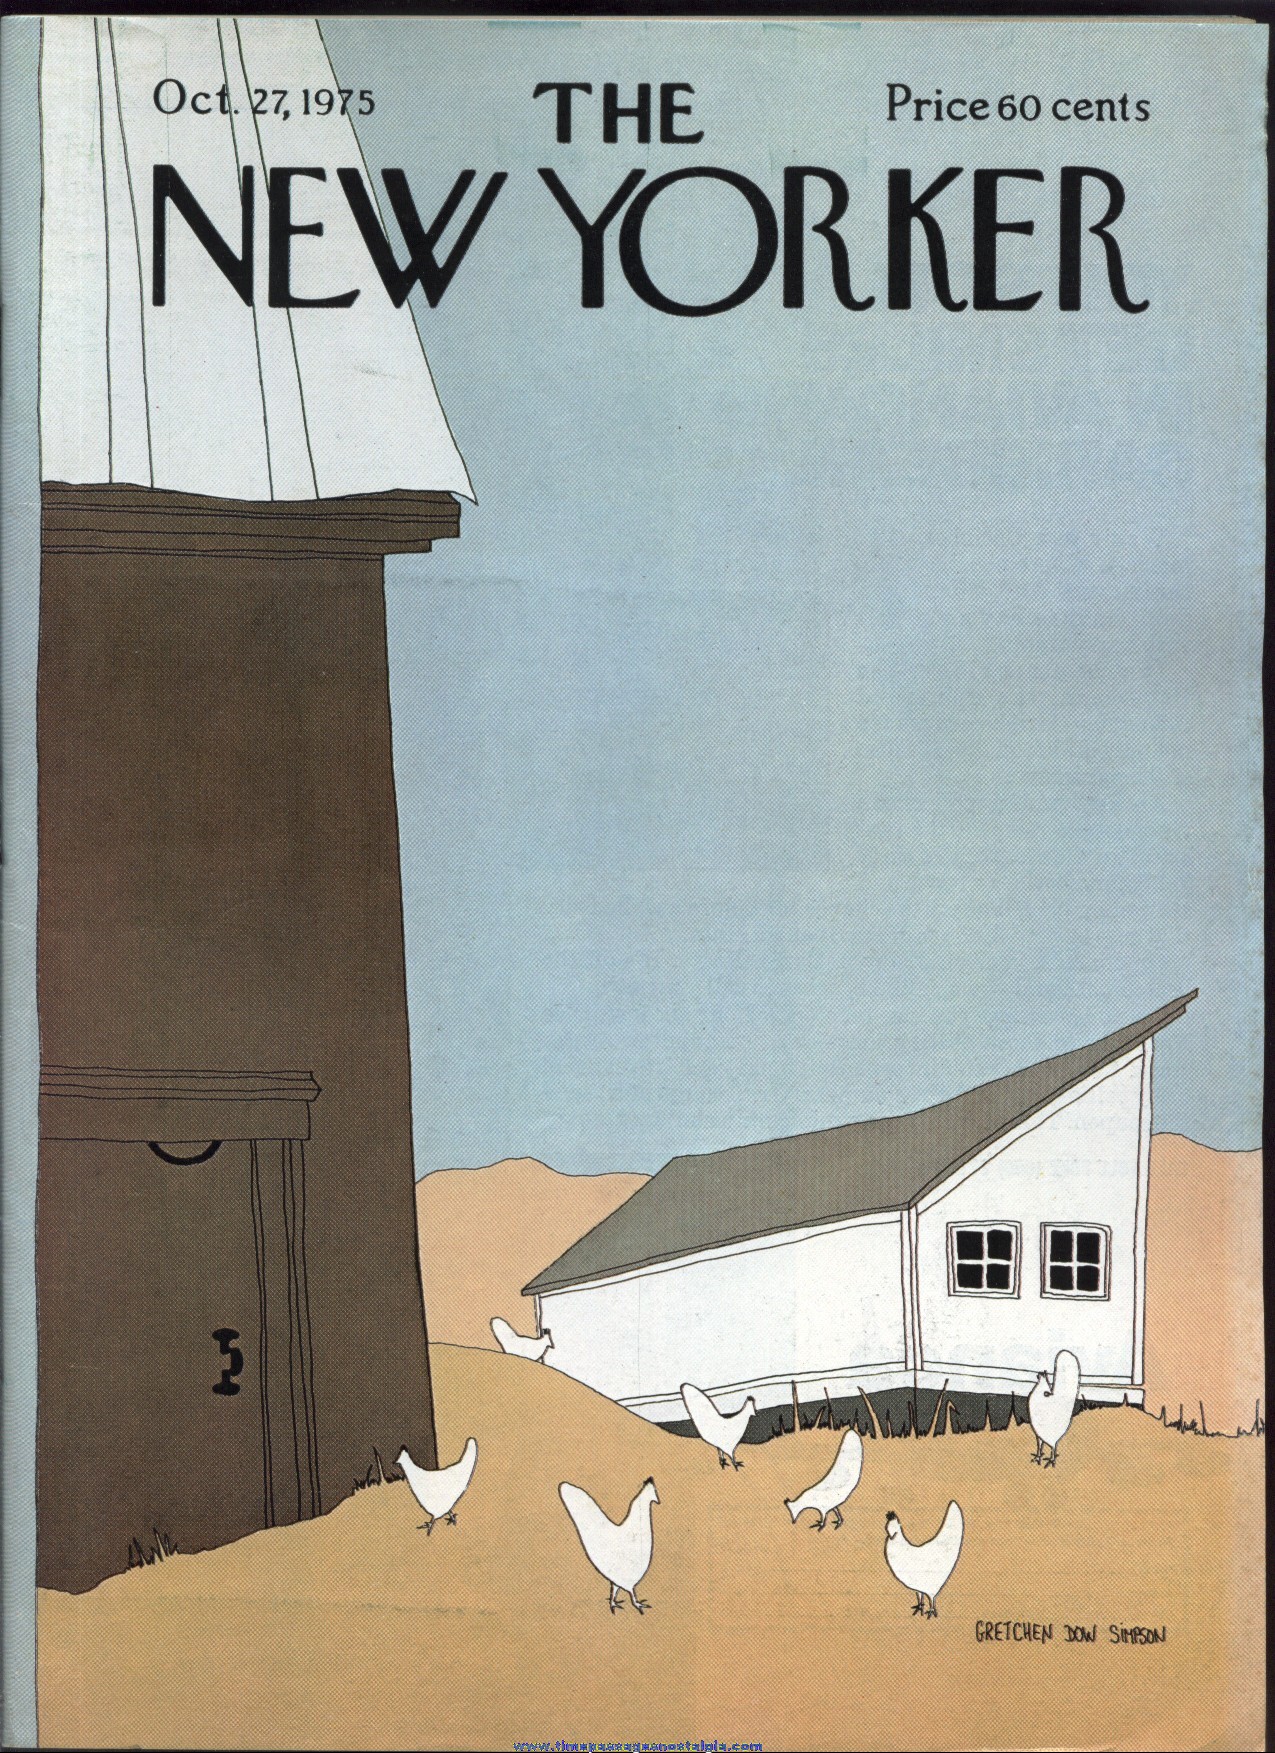 New Yorker Magazine - October 27, 1975 - Cover by Gretchen Dow Simpson